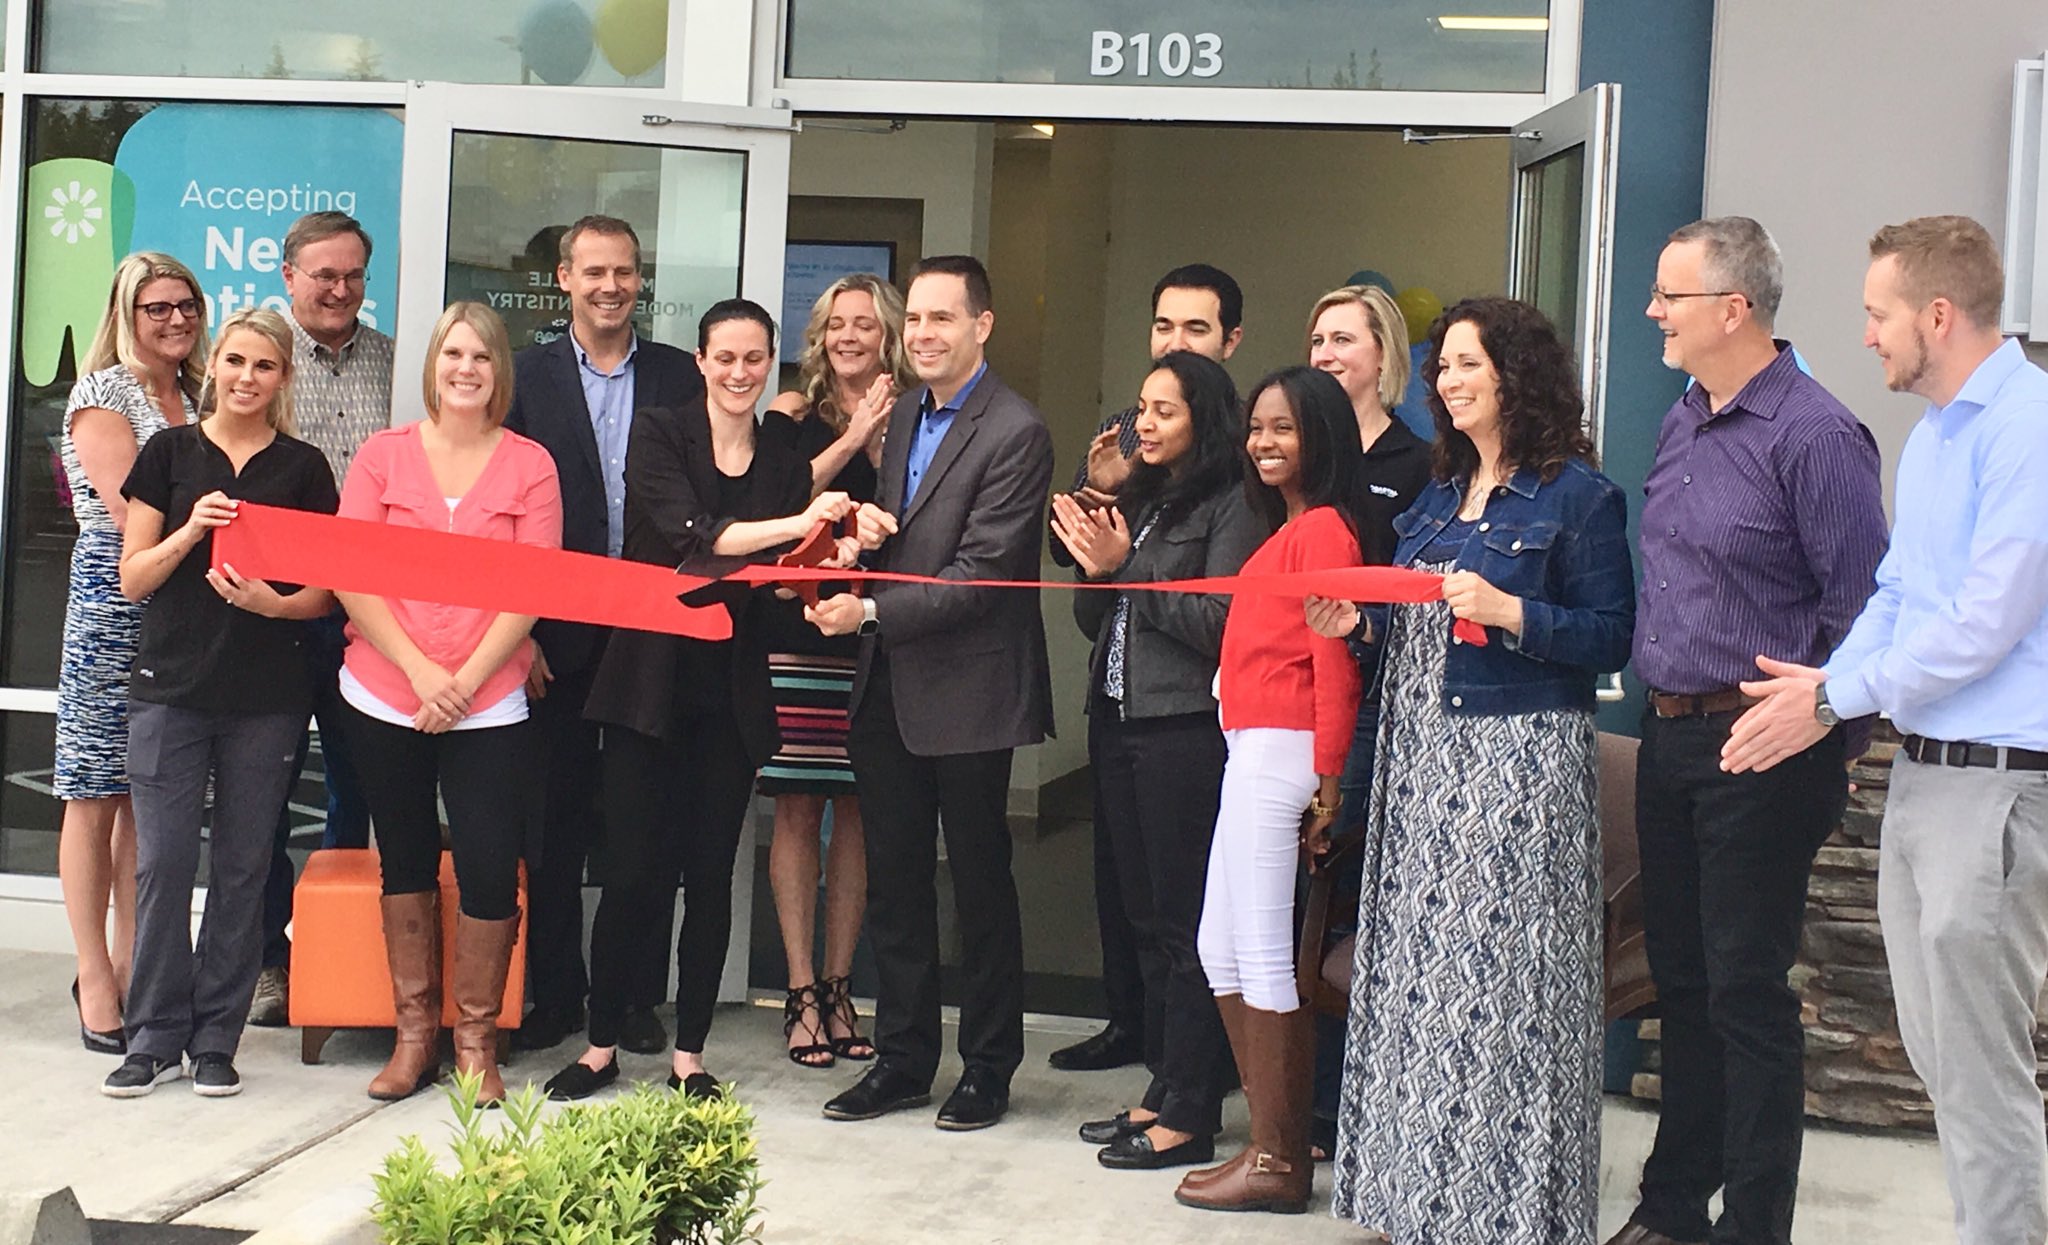 Marysville Wa On Twitter Congratulations To Marysville Modern Dentistry Celebrating Its Opening At 88th St Ne 36th Ave Ne W Mayor Jon Nehring Councilmember Mark James Gmtcoc Welcome To Marysville Businessfriendly